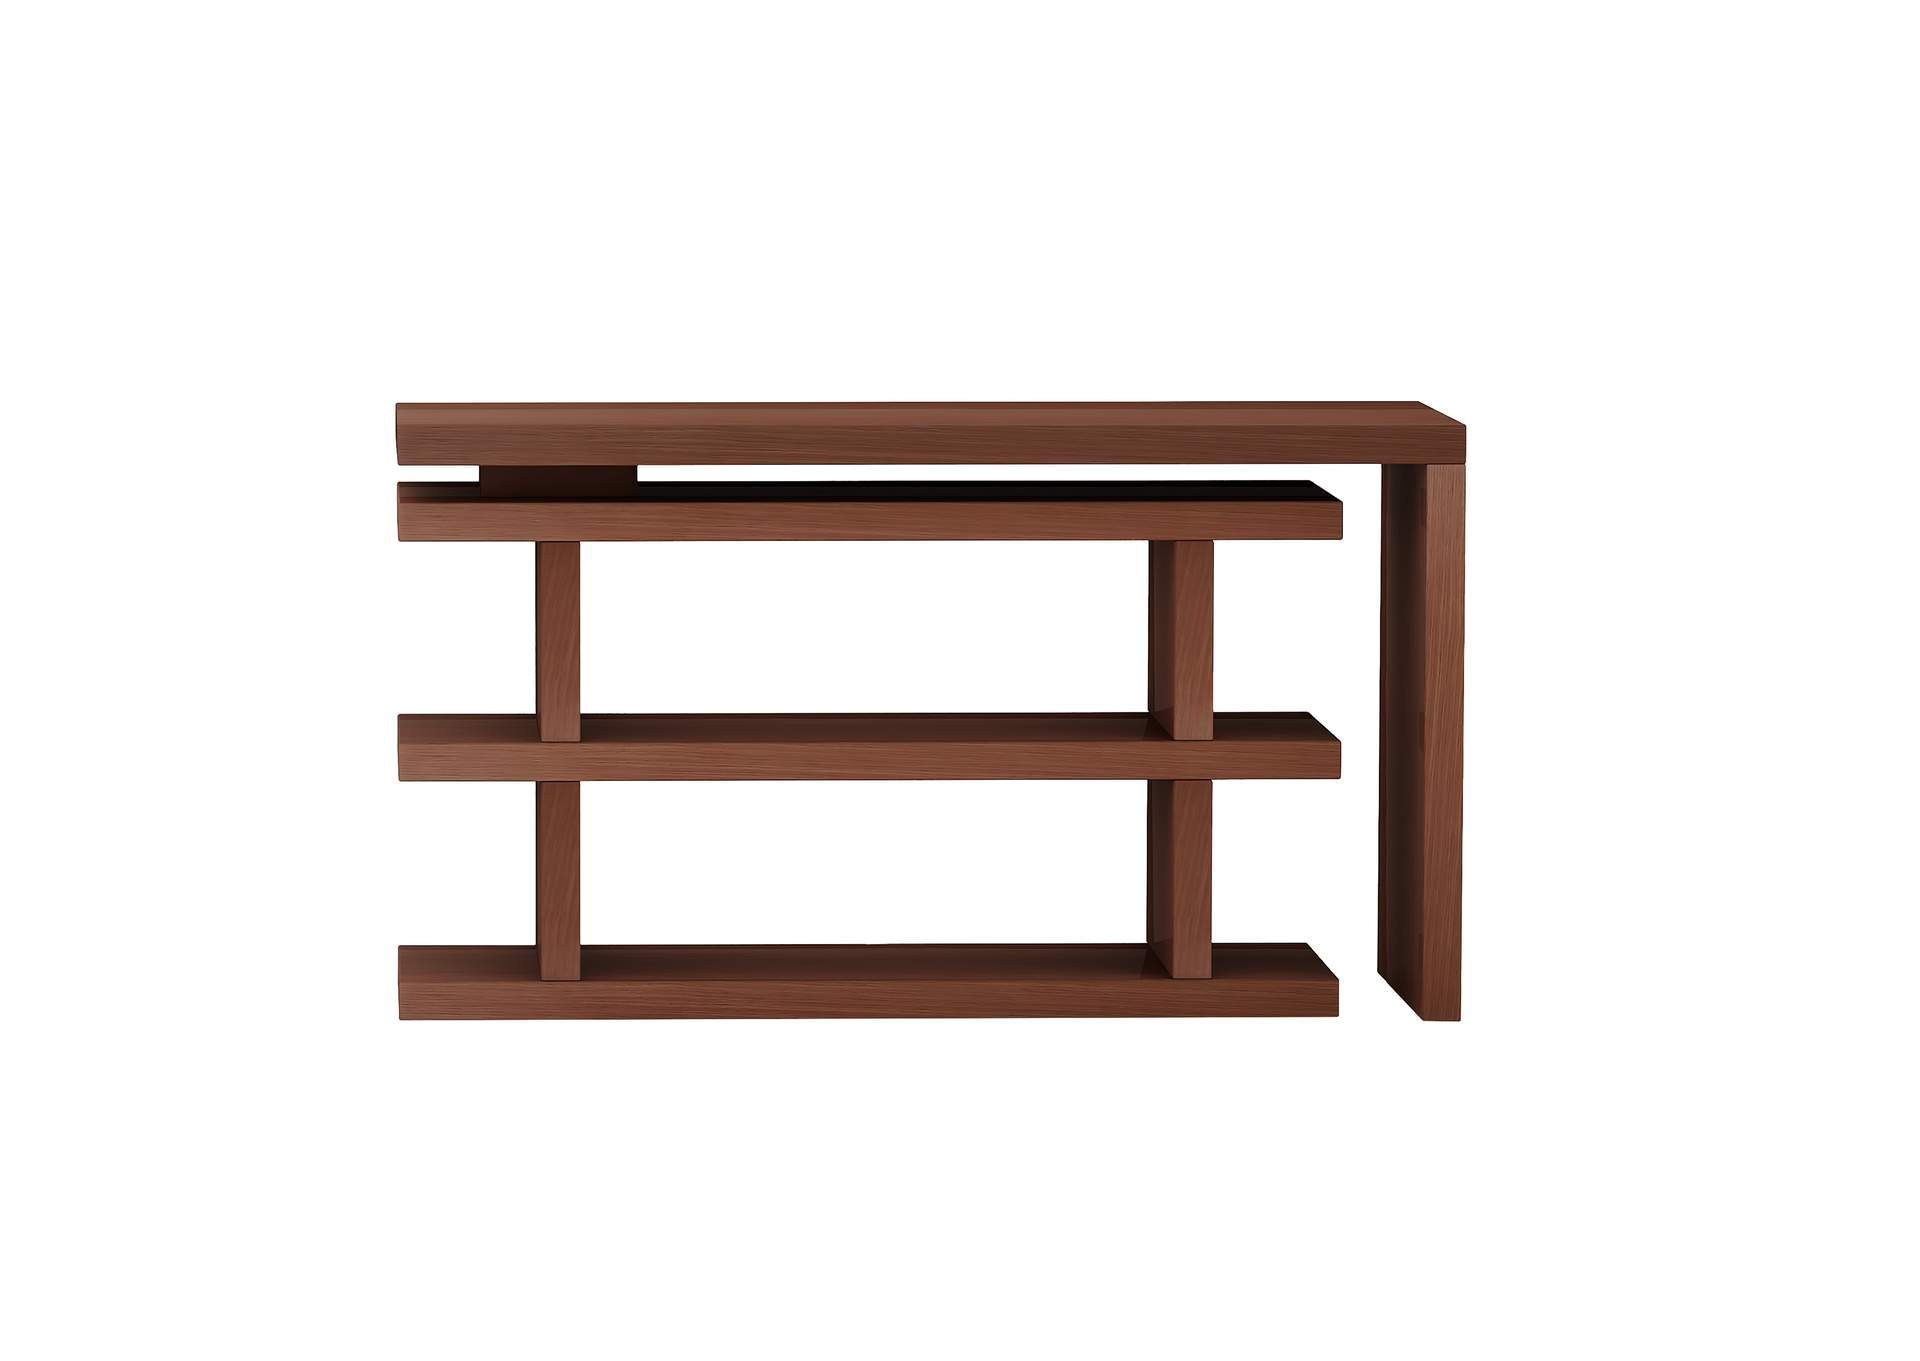 Motion Home Office Desk With Shelves,Chintaly Imports